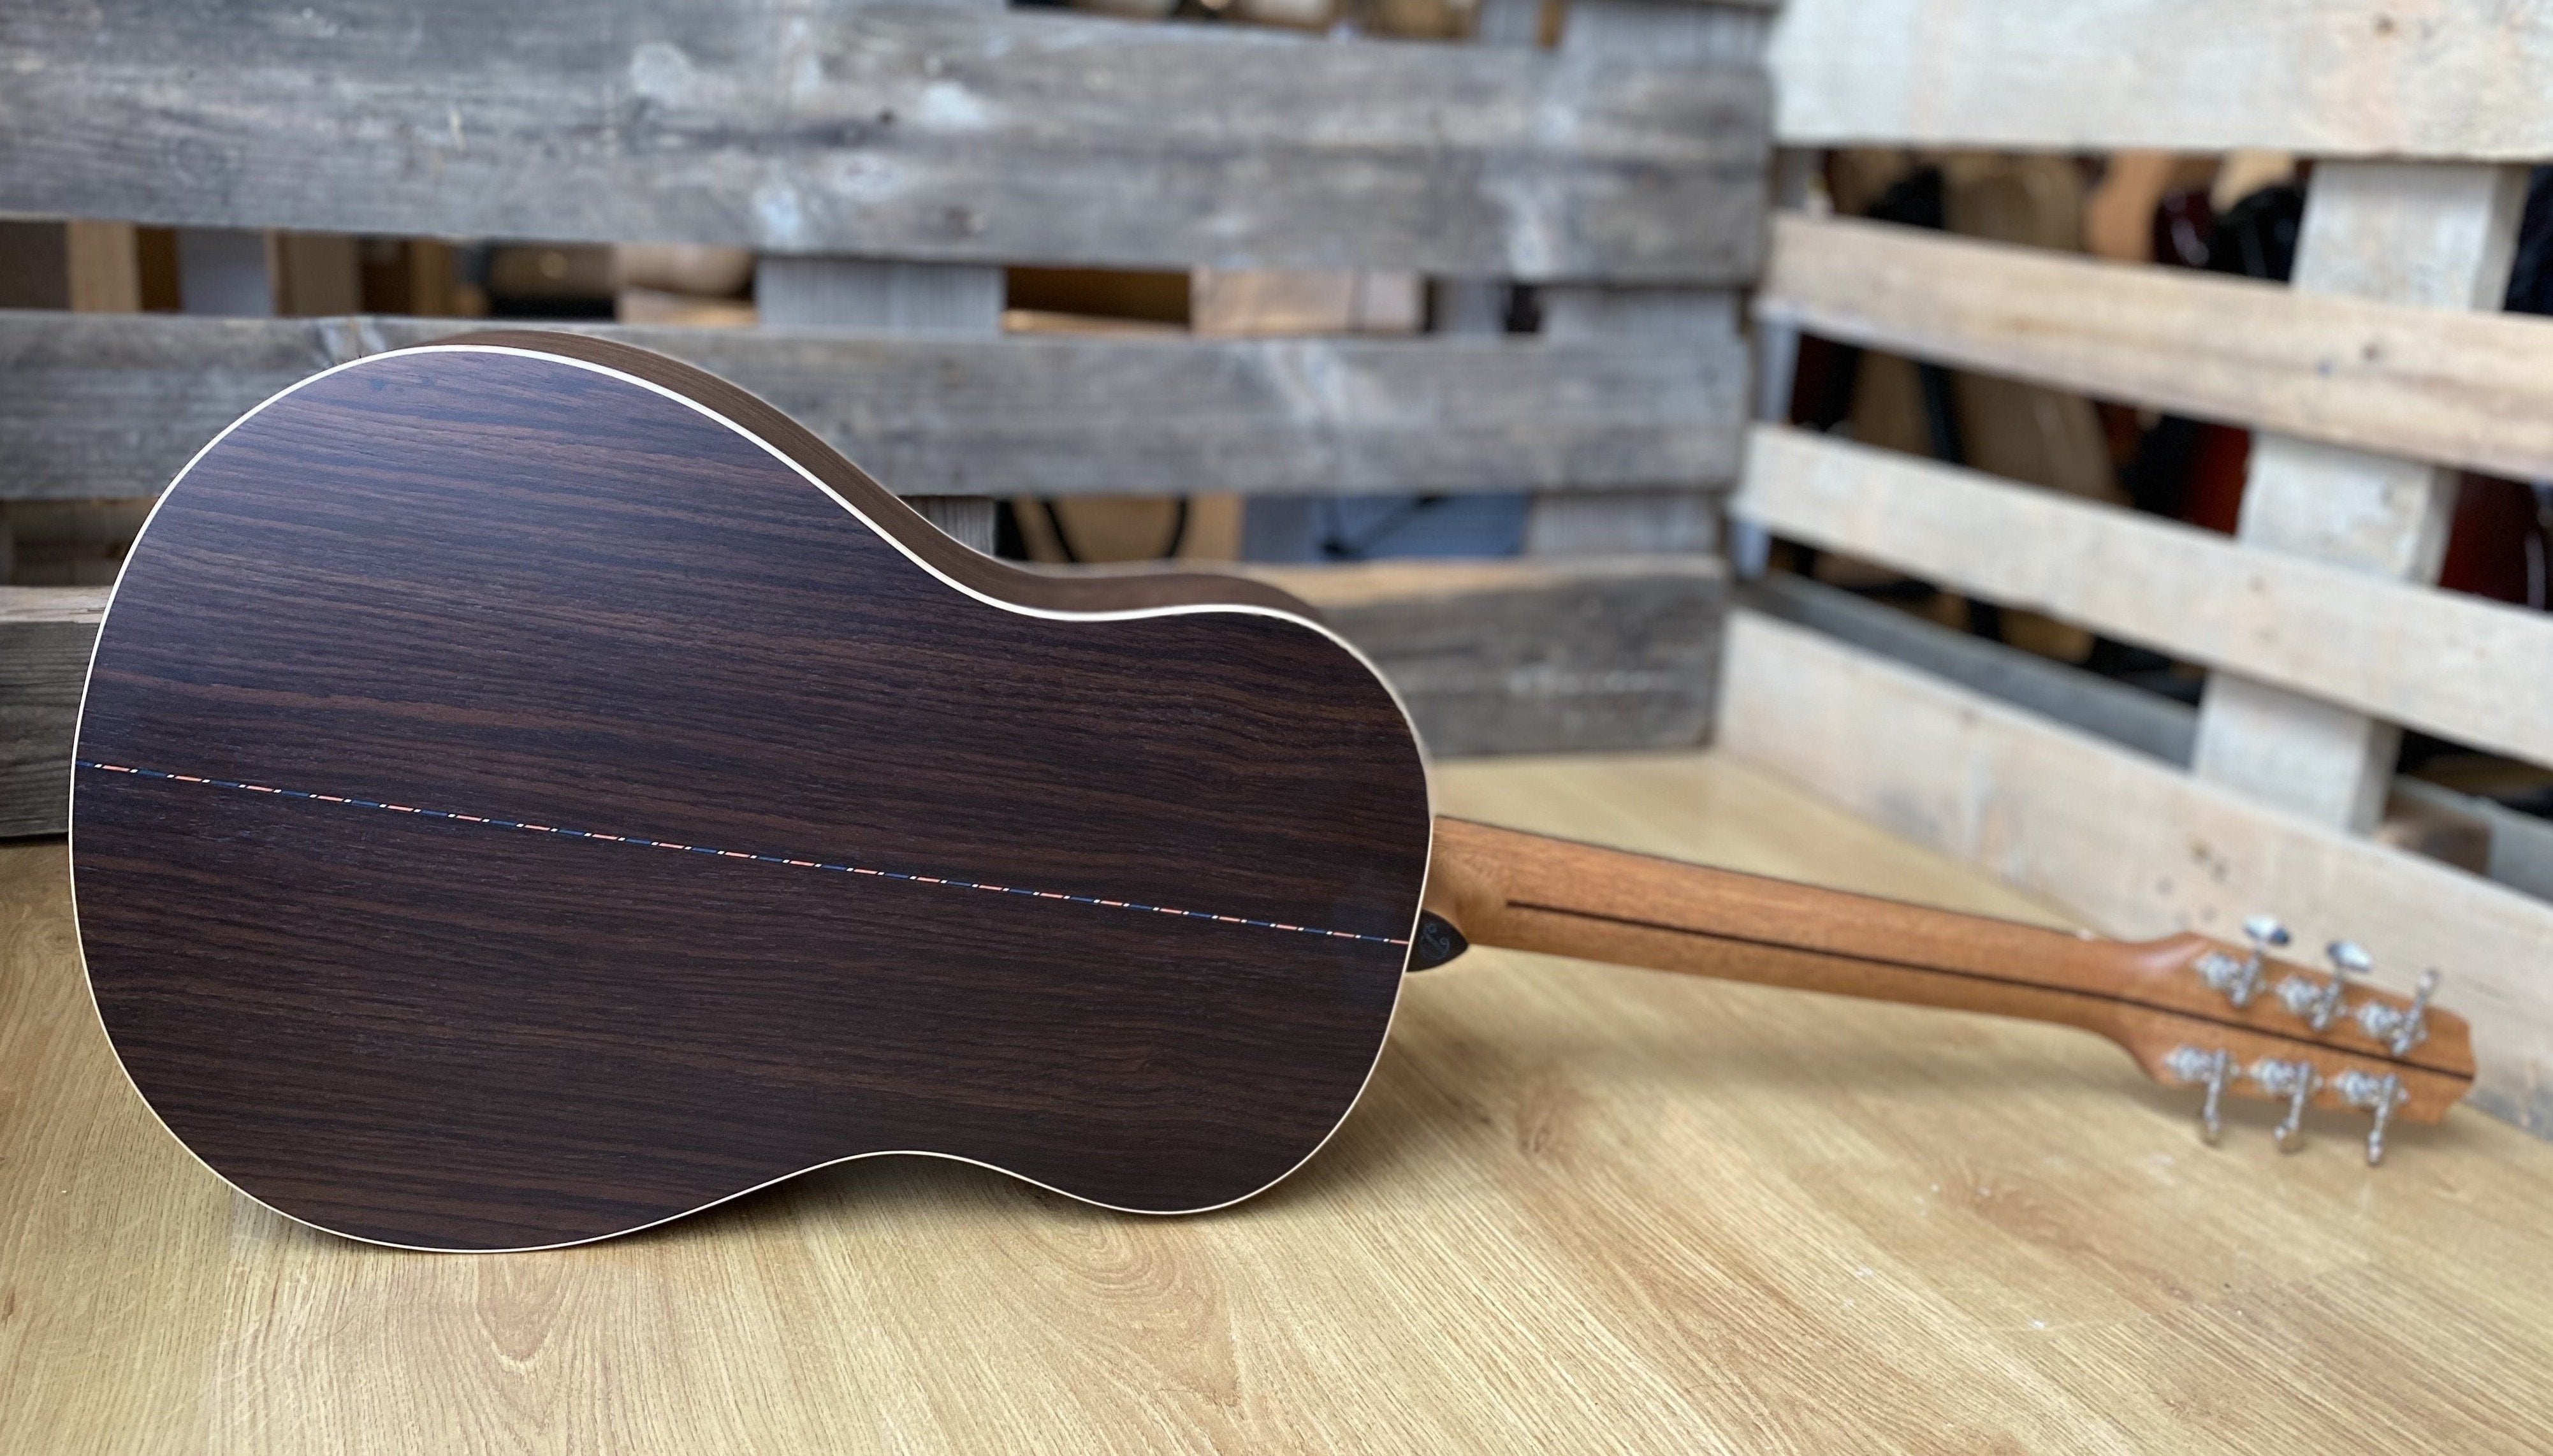 Dowina Rosewood (Ceres) BV-DS, Acoustic Guitar for sale at Richards Guitars.